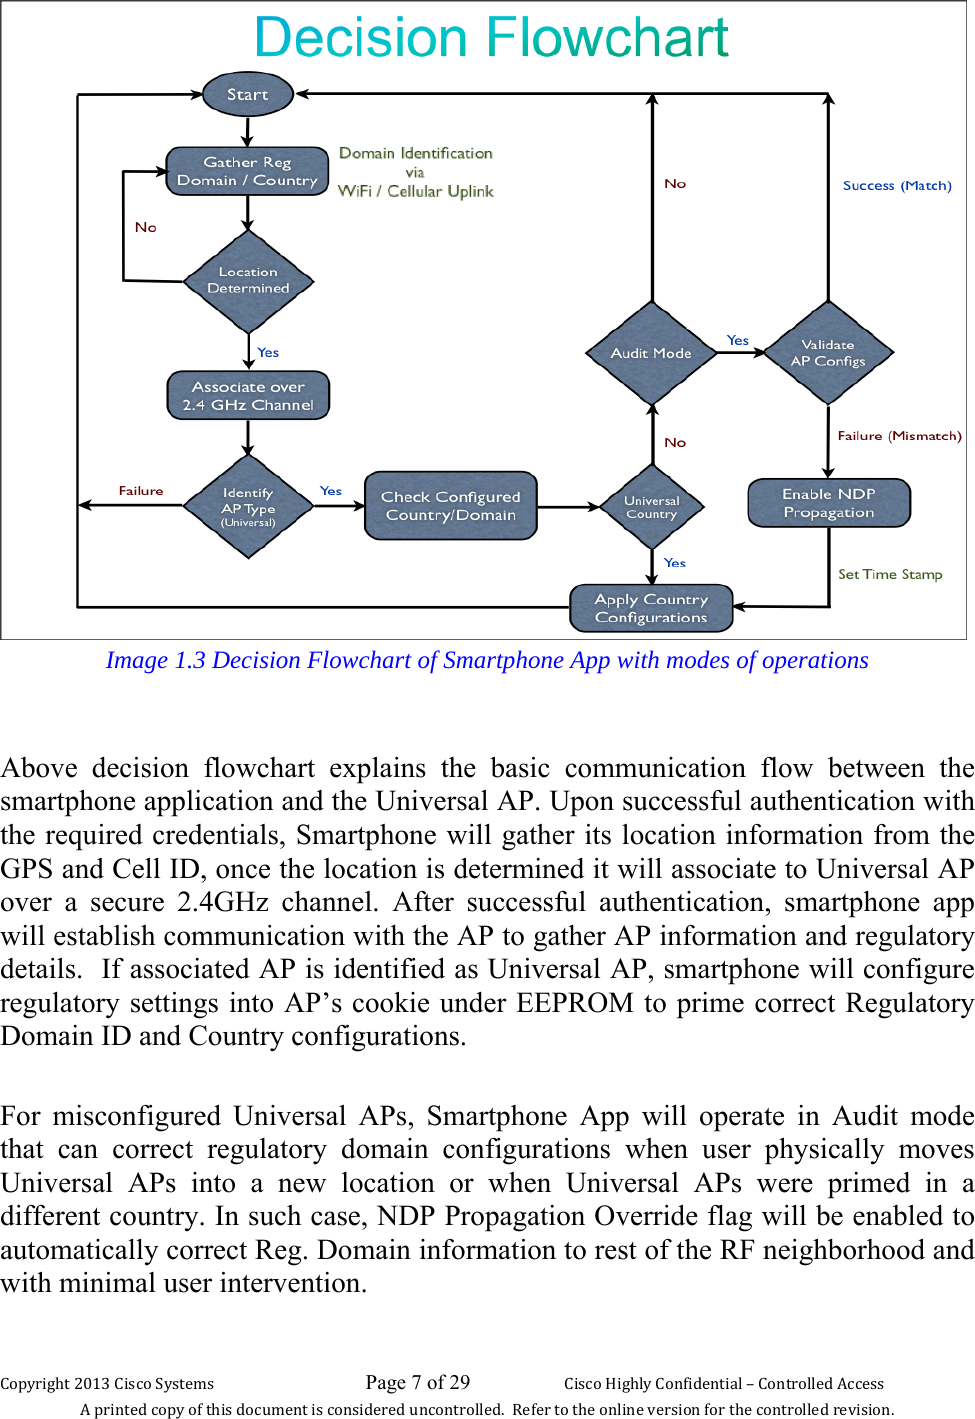 Copyright 2013 Cisco Systems                             Page 7 of 29                     Cisco Highly Confidential – Controlled Access A printed copy of this document is considered uncontrolled.  Refer to the online version for the controlled revision.  Image 1.3 Decision Flowchart of Smartphone App with modes of operations   Above decision flowchart explains the basic communication flow between the smartphone application and the Universal AP. Upon successful authentication with the required credentials, Smartphone will gather its location information from the GPS and Cell ID, once the location is determined it will associate to Universal AP over a secure 2.4GHz channel. After successful authentication, smartphone app will establish communication with the AP to gather AP information and regulatory details.  If associated AP is identified as Universal AP, smartphone will configure regulatory settings into AP’s cookie under EEPROM to prime correct Regulatory Domain ID and Country configurations.   For misconfigured Universal APs, Smartphone App will operate in Audit mode that can correct regulatory domain configurations when user physically moves Universal APs into a new location or when Universal APs were primed in a different country. In such case, NDP Propagation Override flag will be enabled to automatically correct Reg. Domain information to rest of the RF neighborhood and with minimal user intervention.  